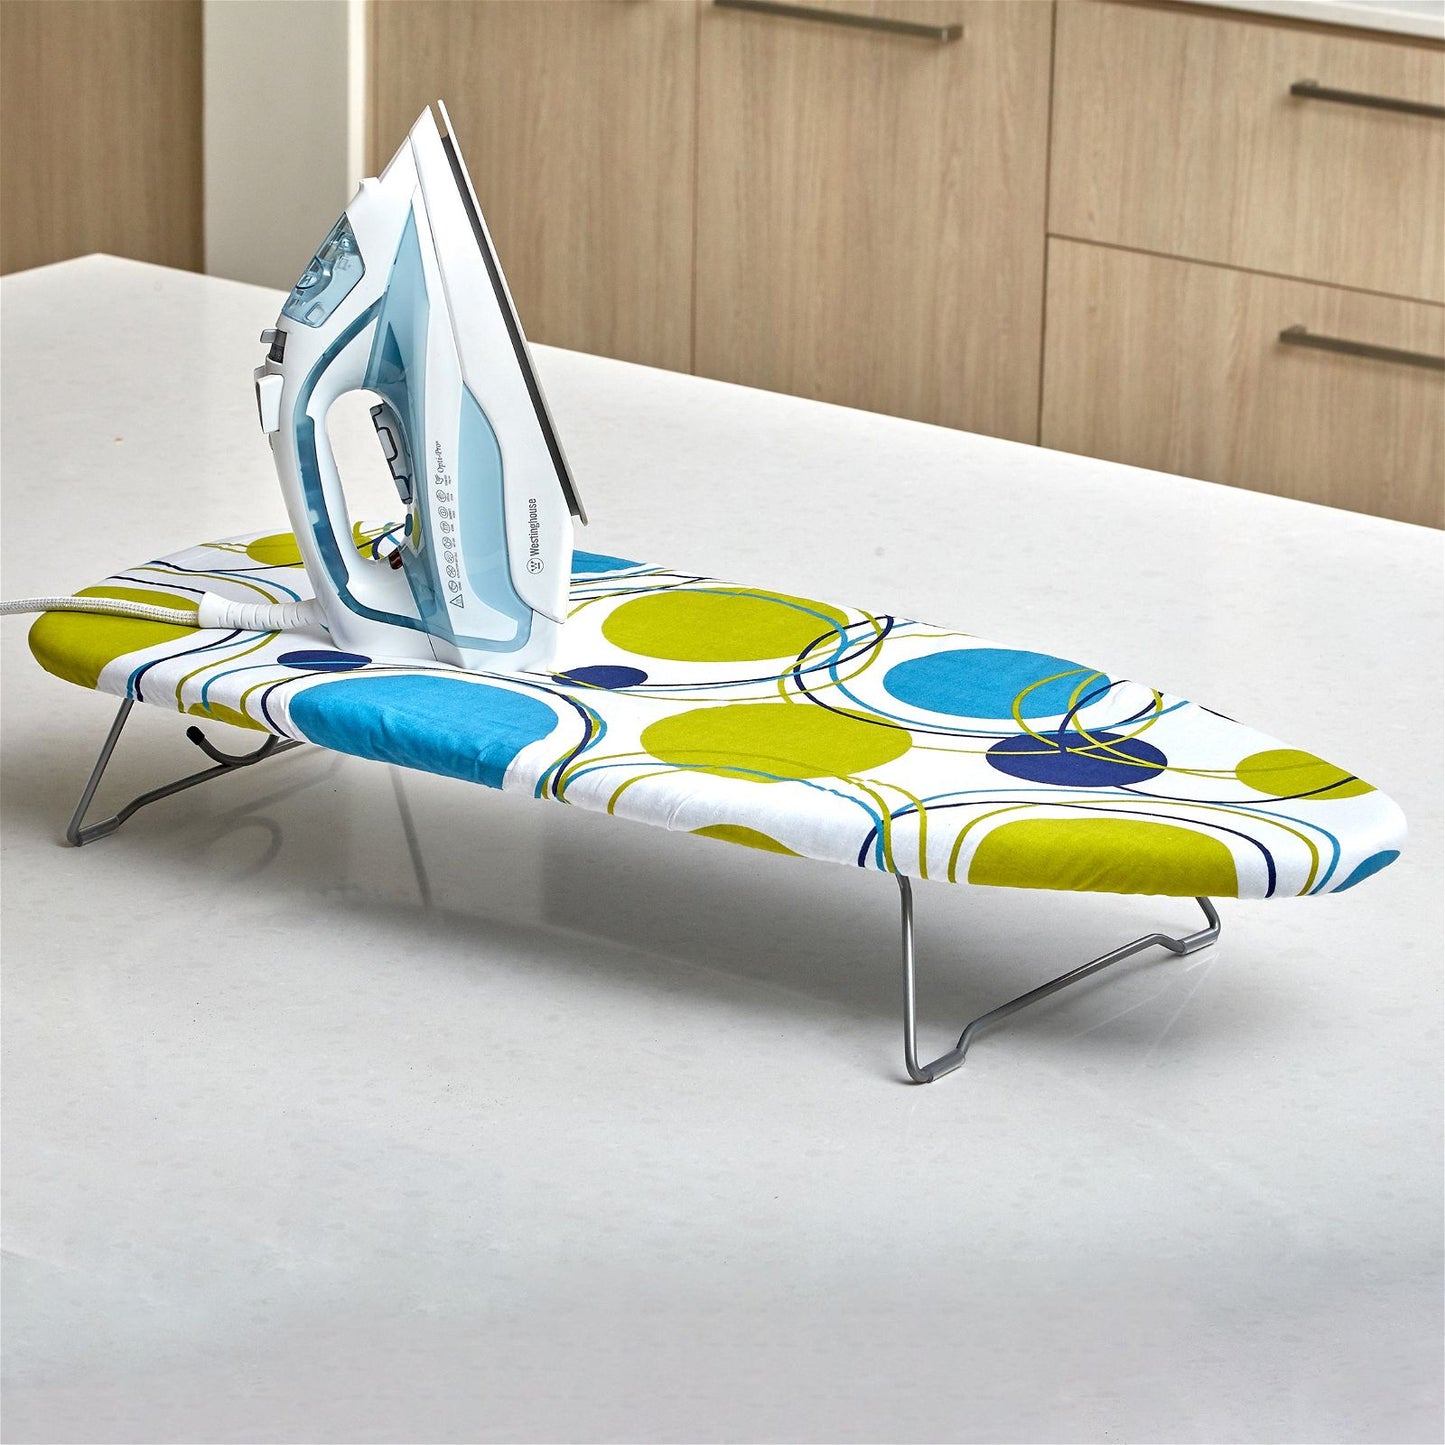 Westinghouse Ironing Board Table Top 700mm-#product_category#- Distributed by: RVM under license